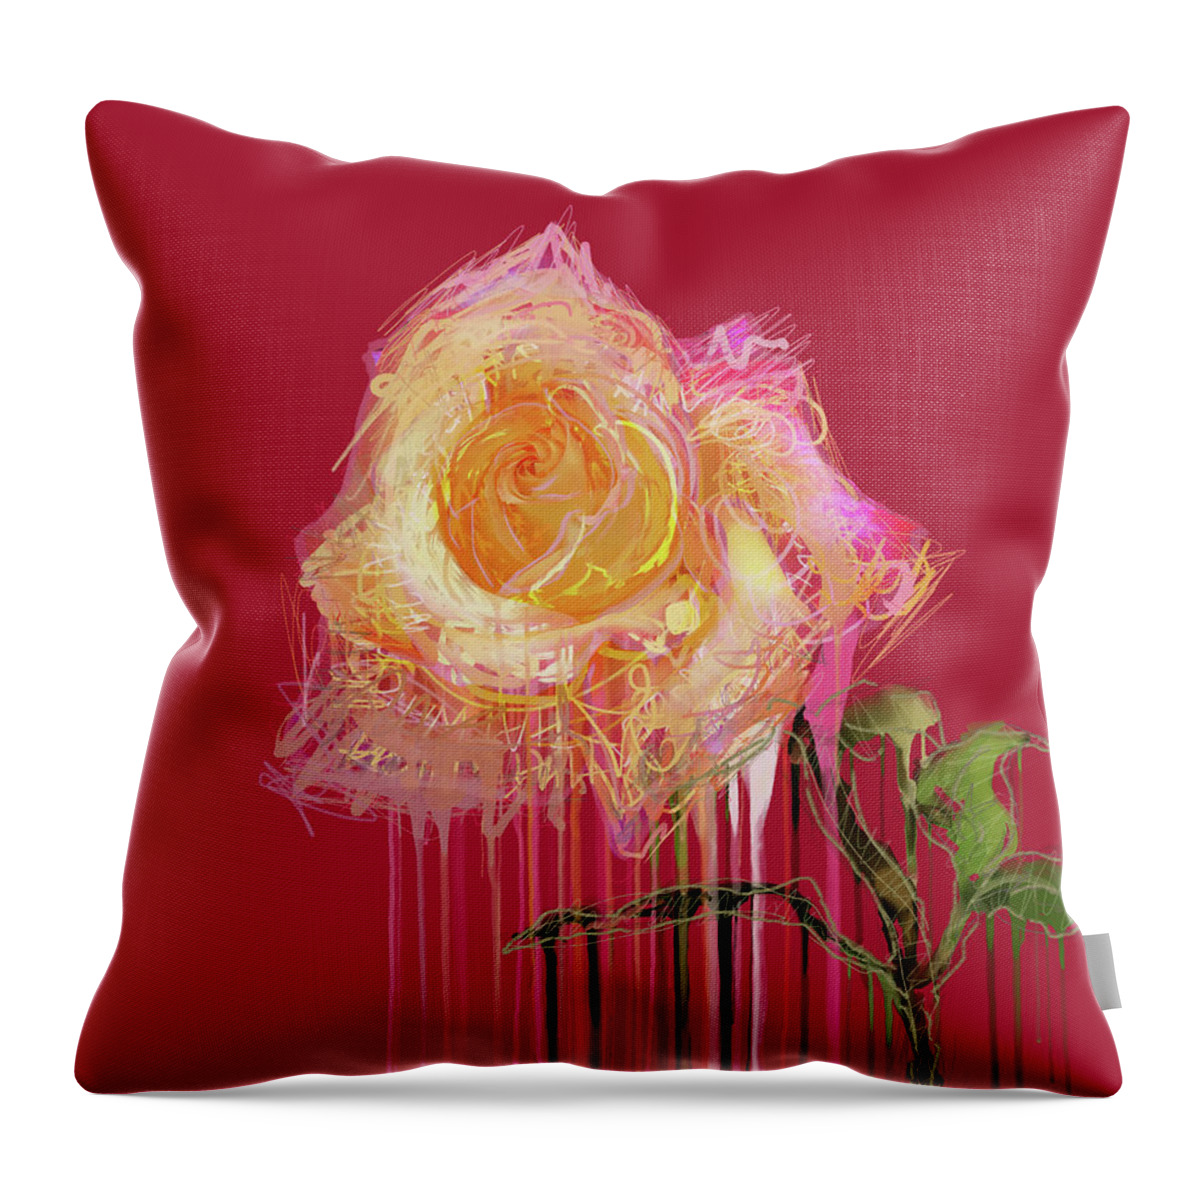 Rose Throw Pillow featuring the mixed media A Rose By Any Other Name - Red by BFA Prints